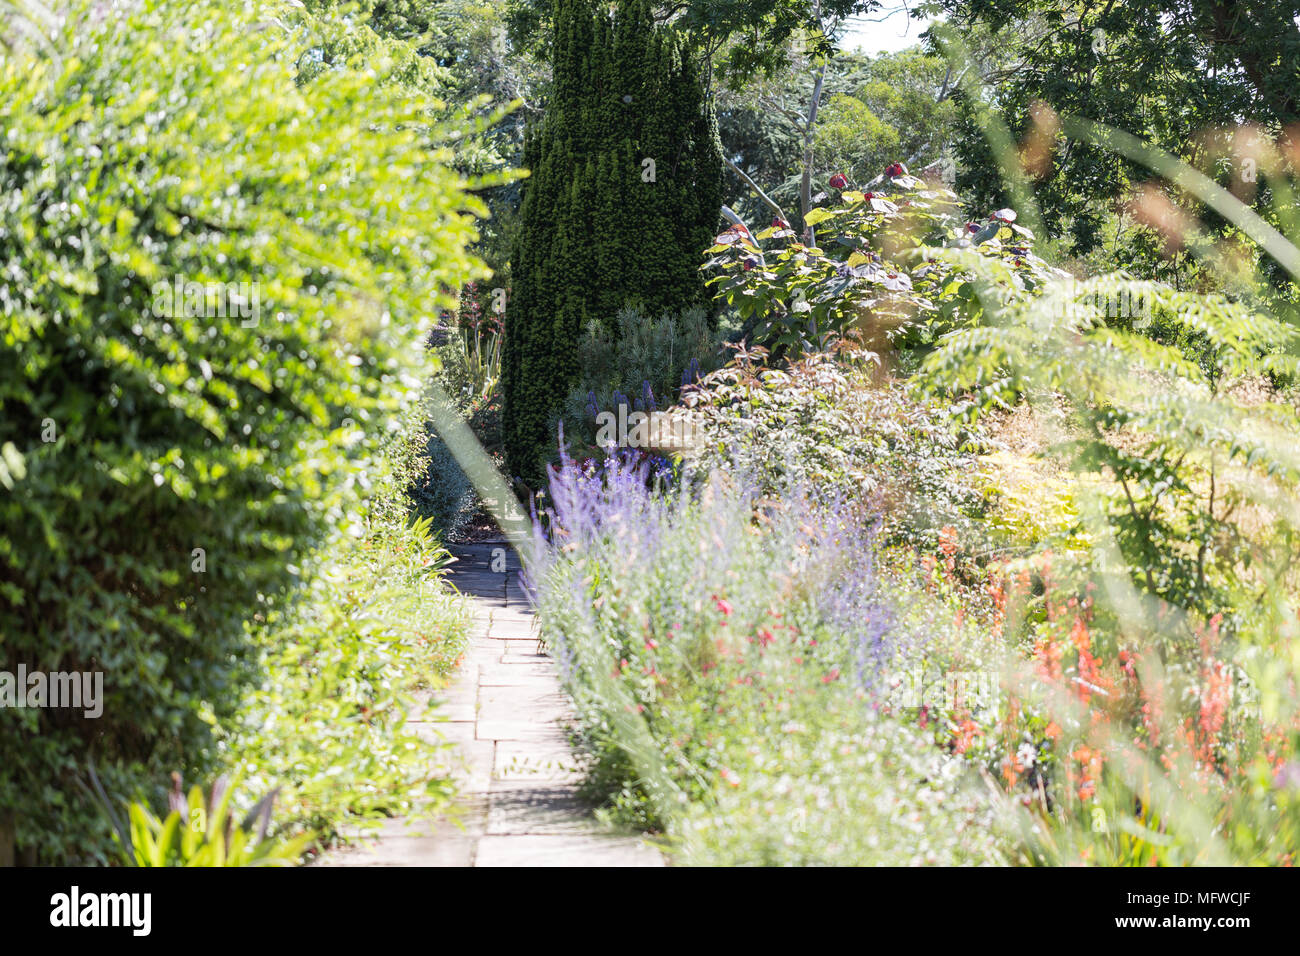 Garden with path, flower beds, bushes and flowers Stock Photo